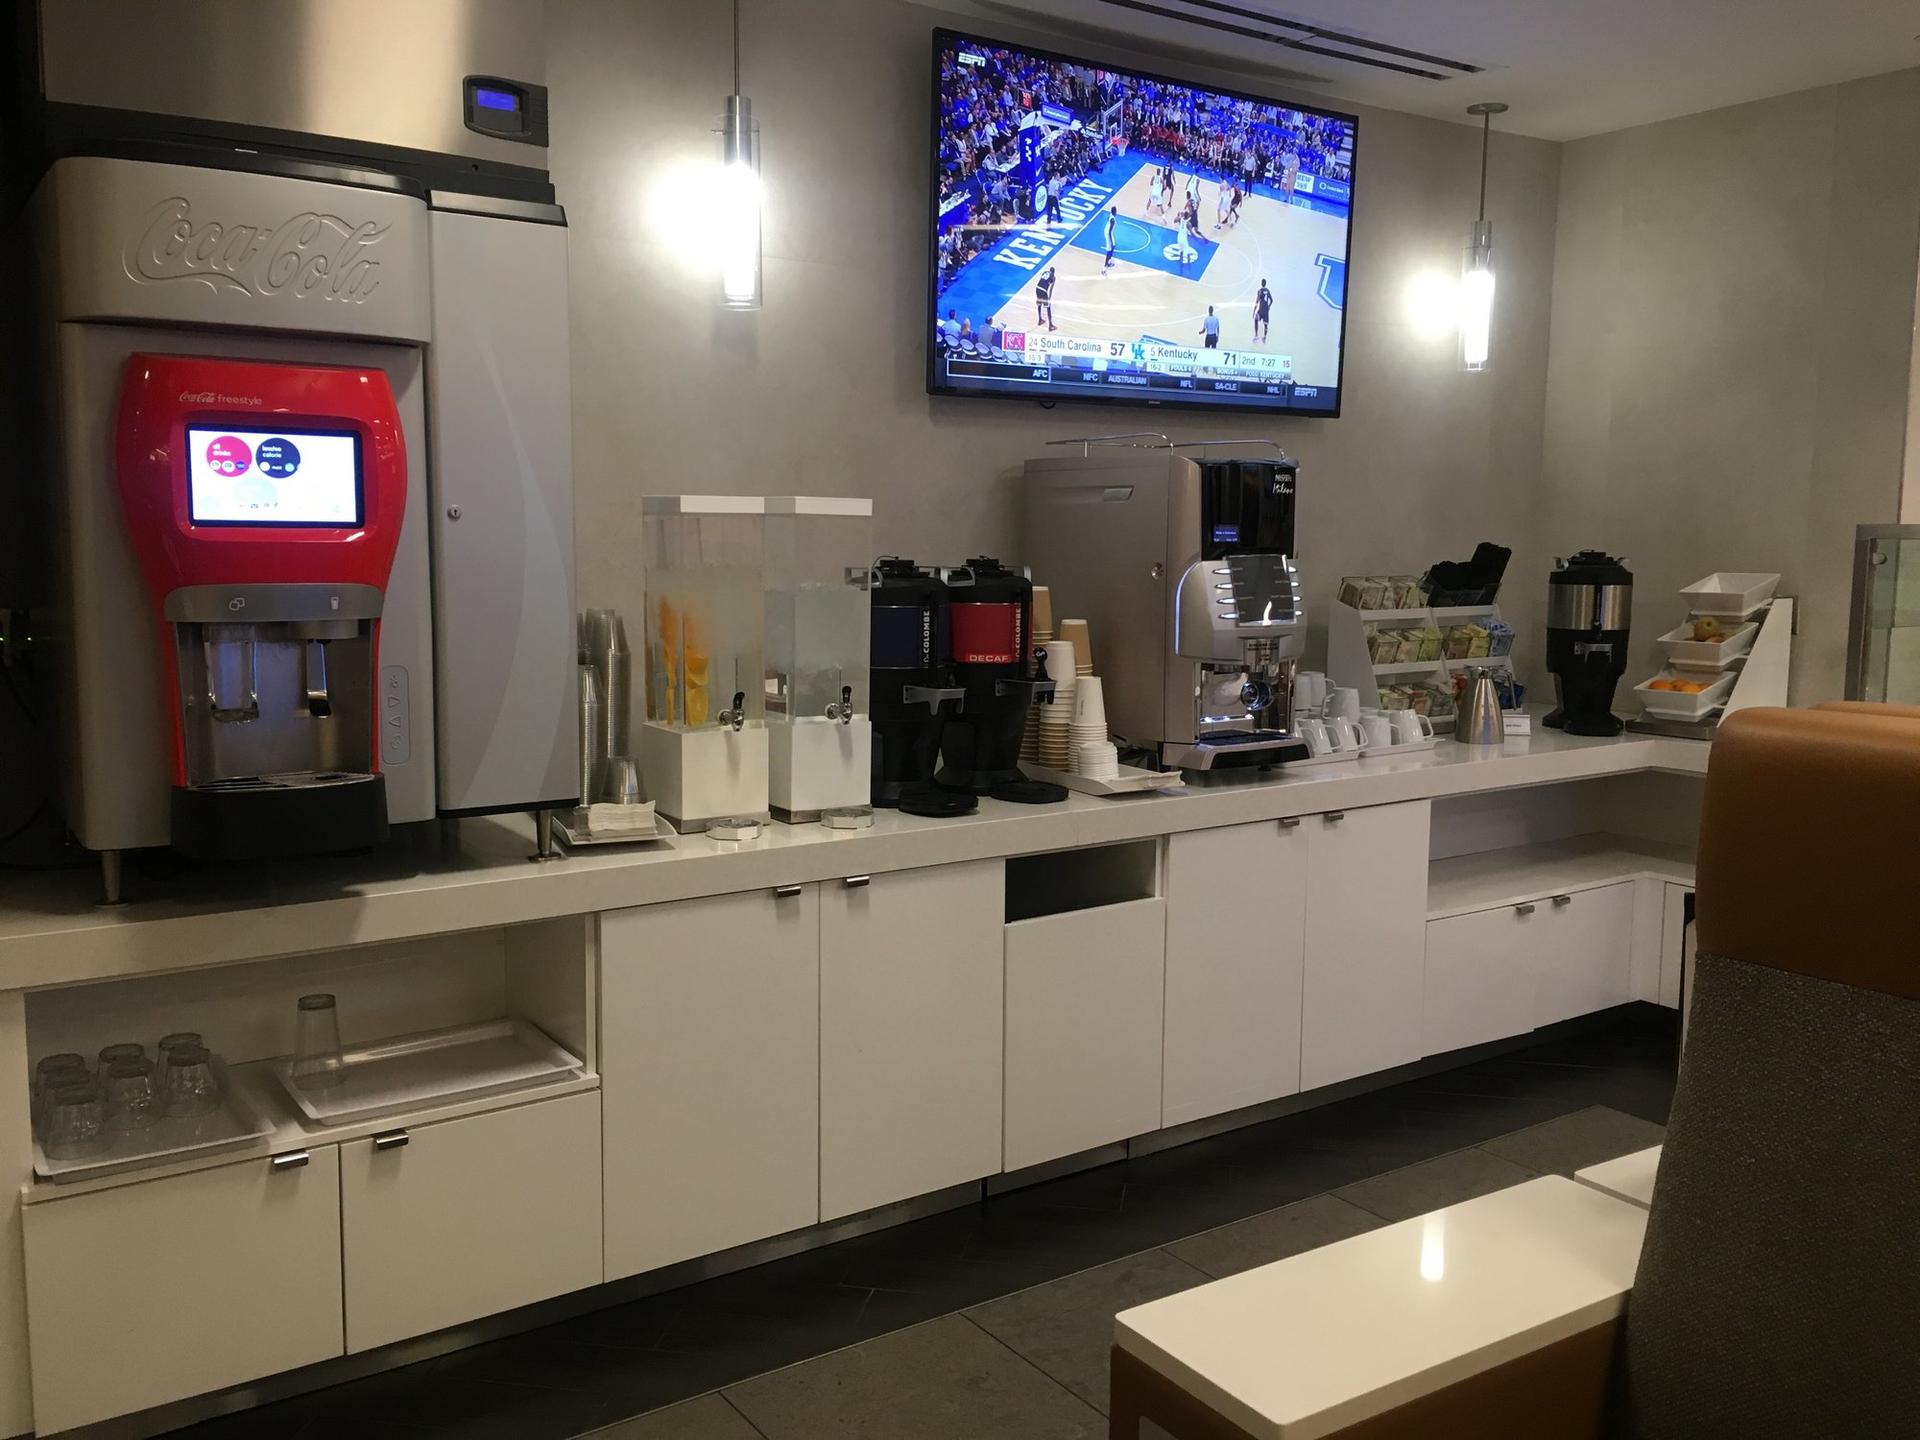 American Airlines Admirals Club (Gate A7) image 8 of 25